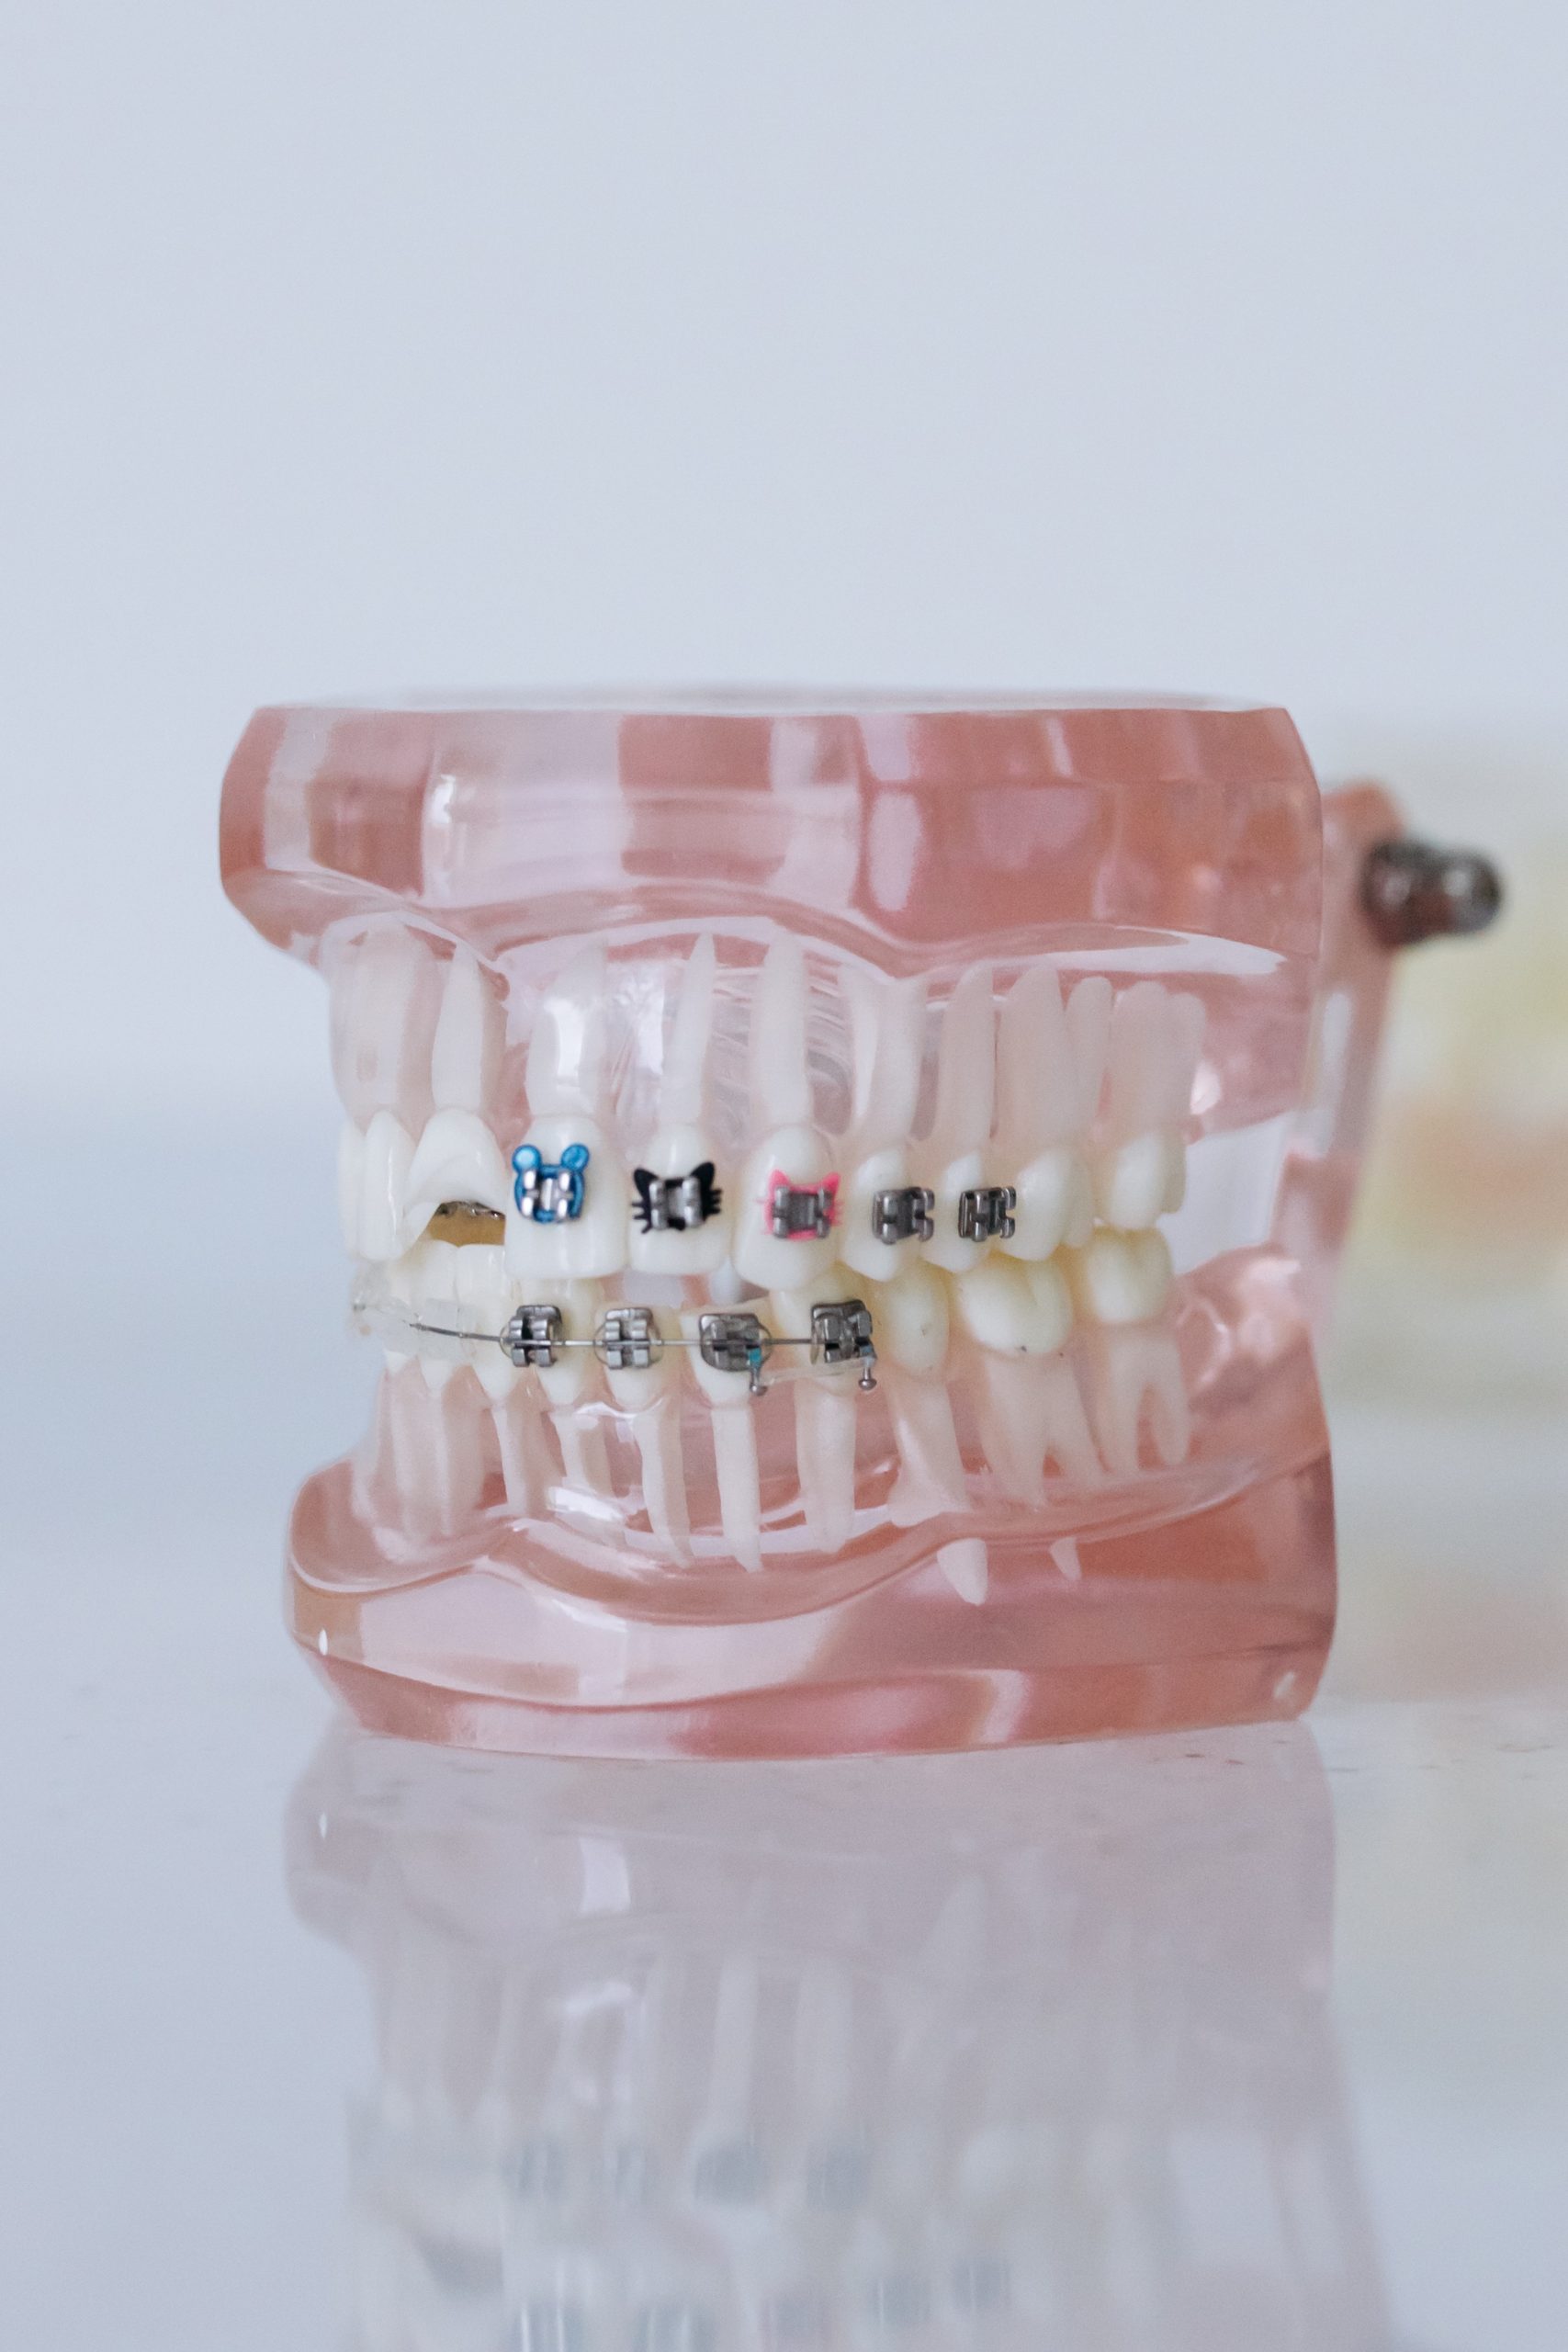 Braces For Adults: Am I Too Old?